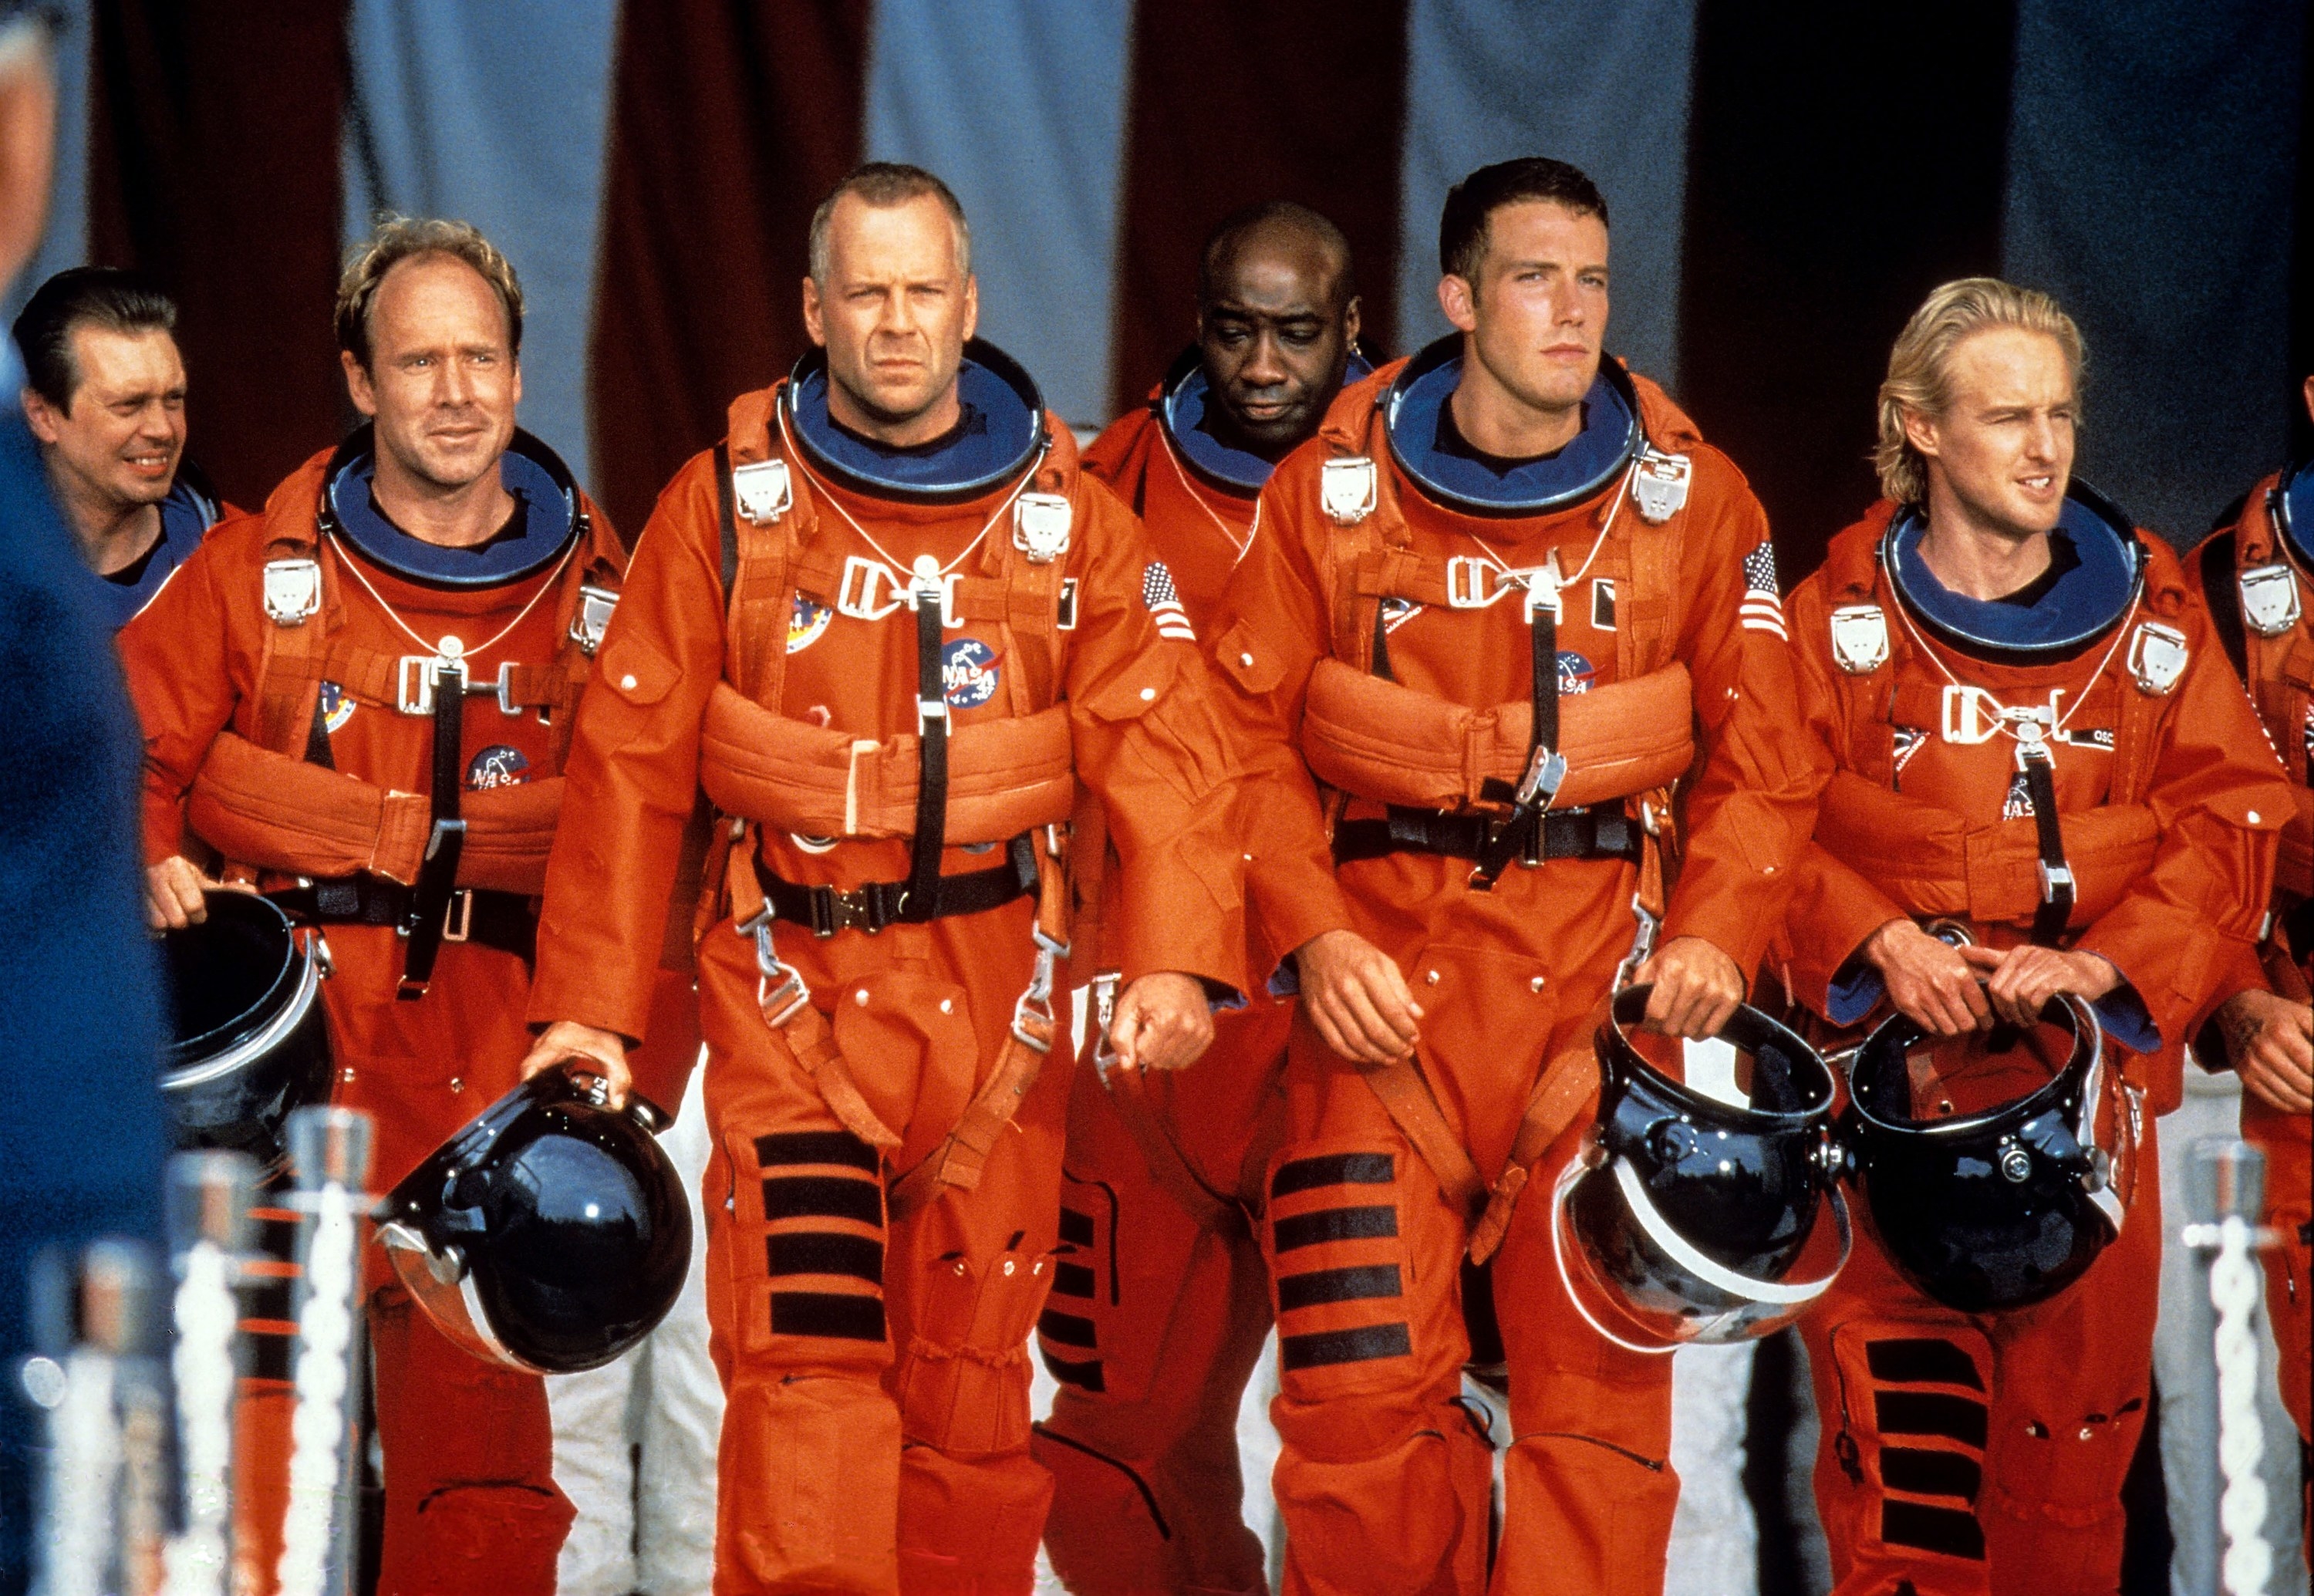 Bruce Willis and Ben Affleck and crew walking out in space suits